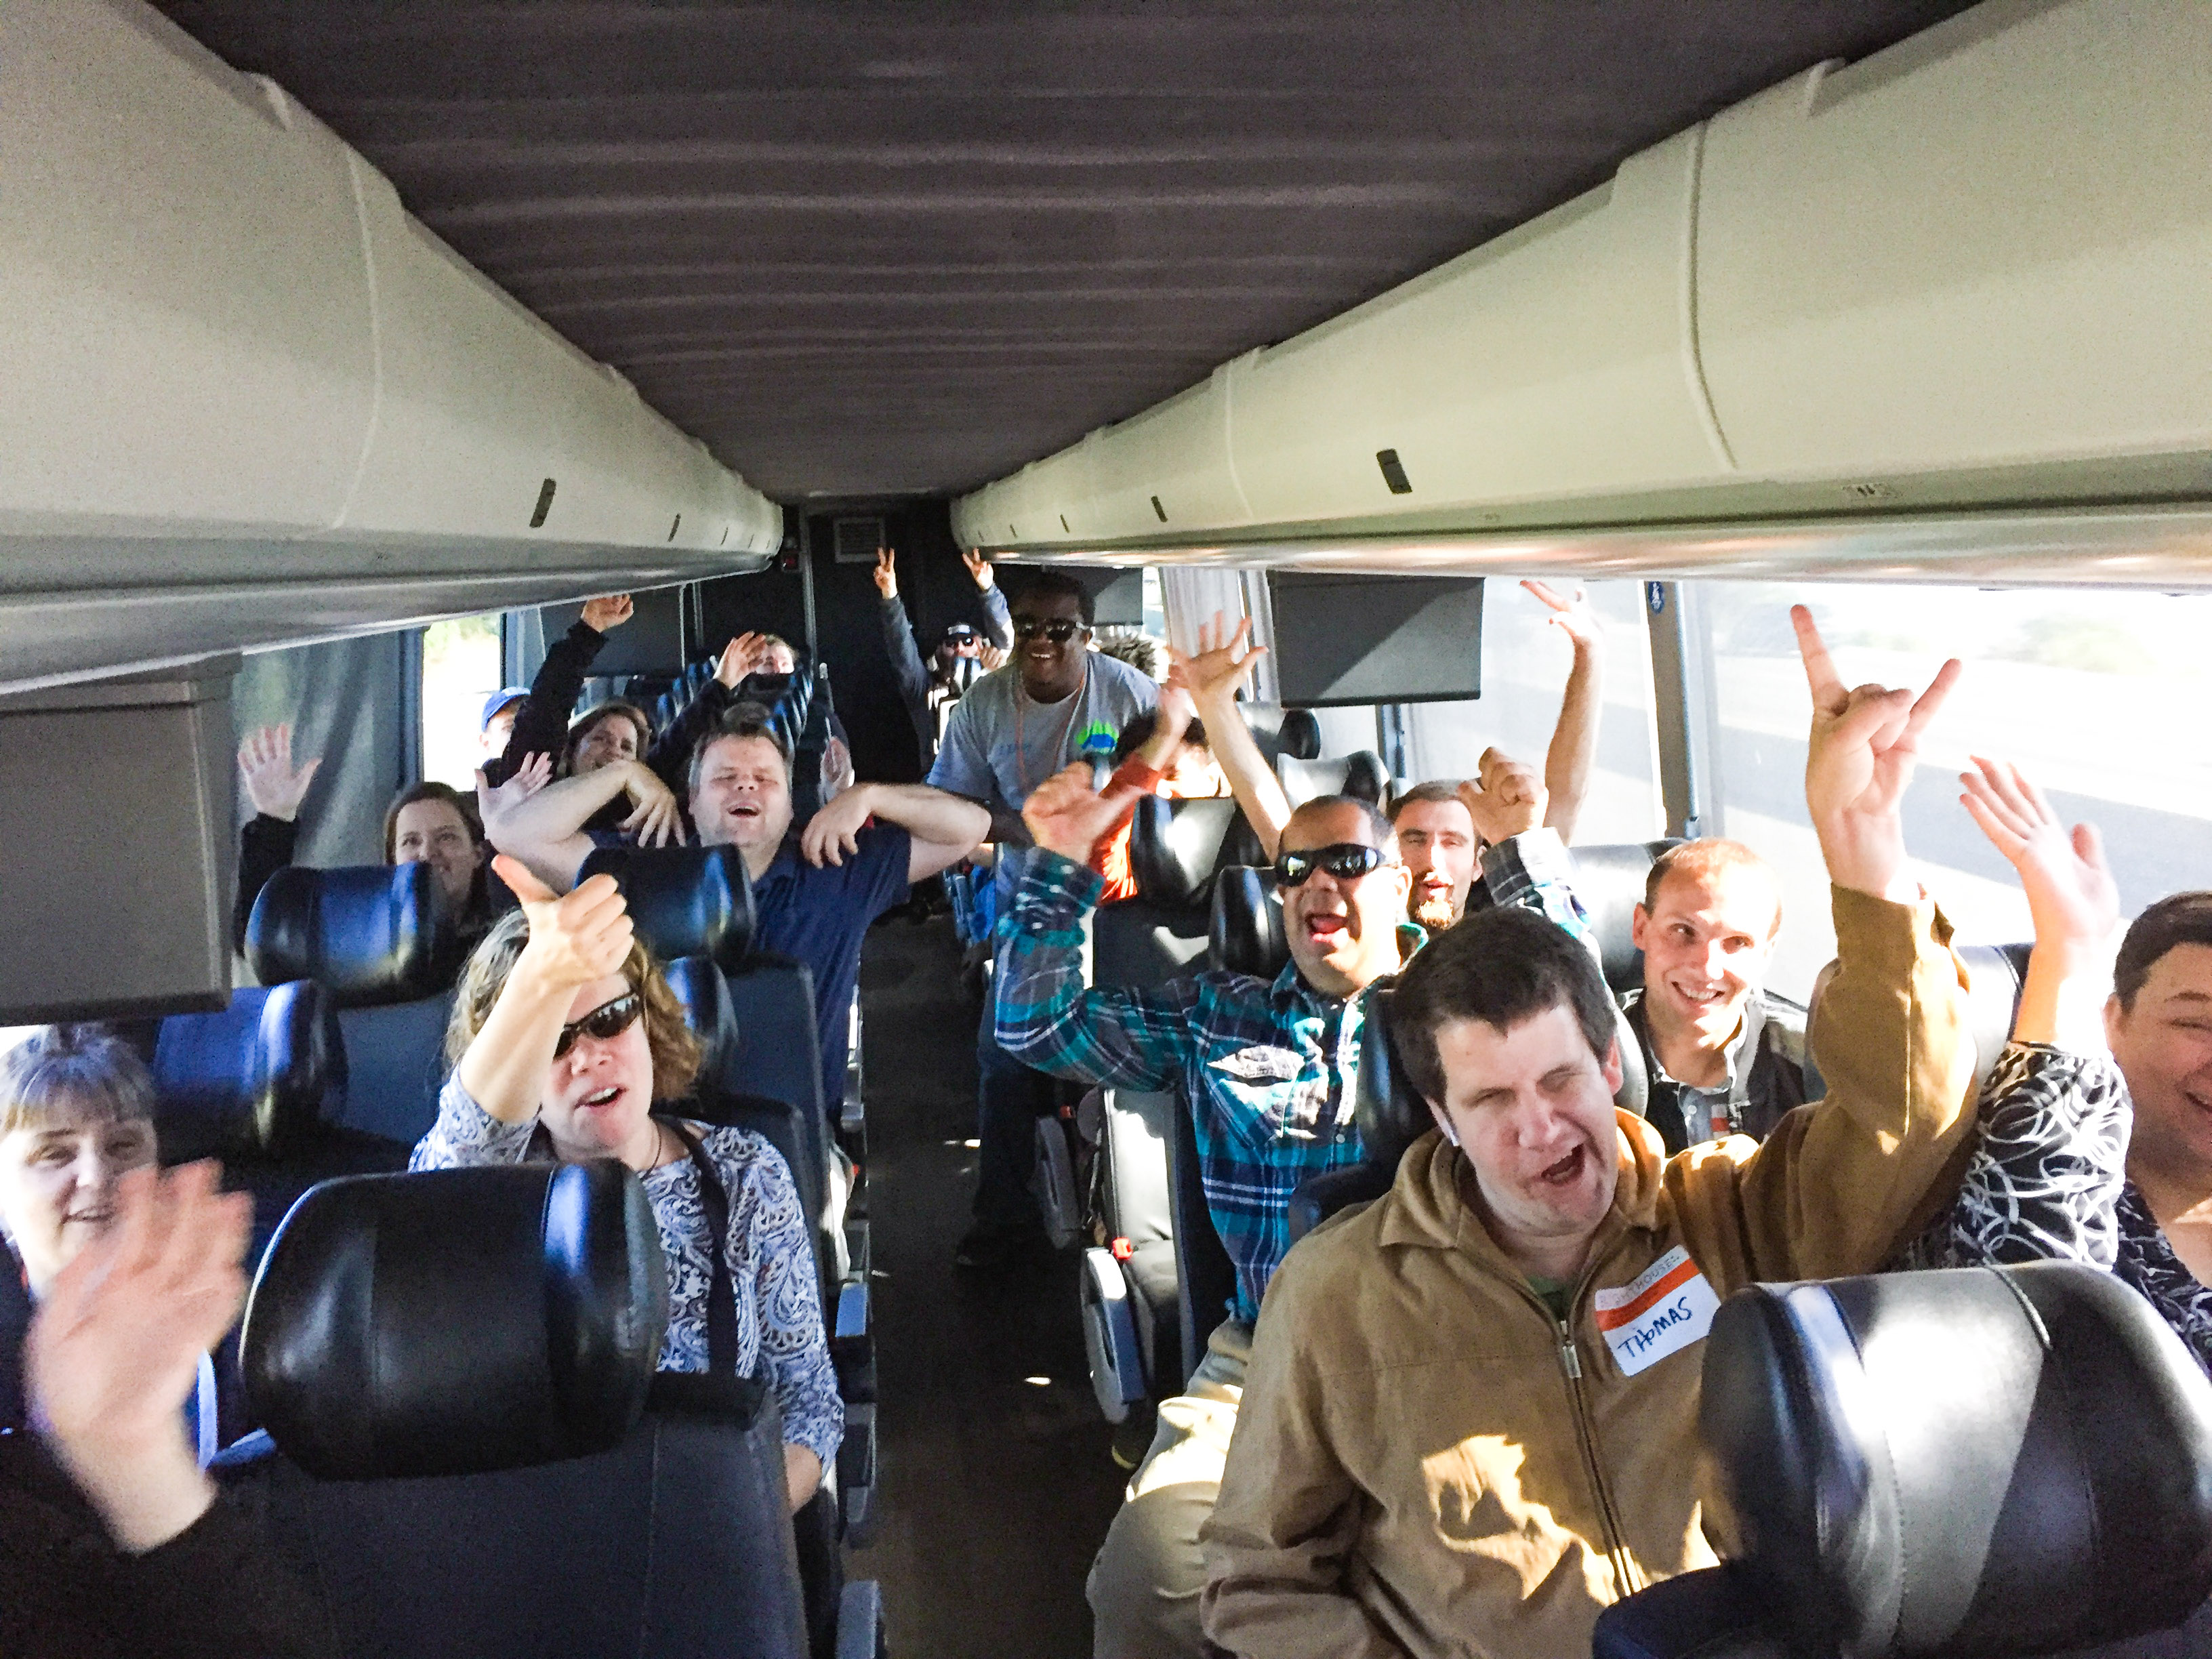 Participants in the bus on the way to Maker Faire raise their arms in celebration.